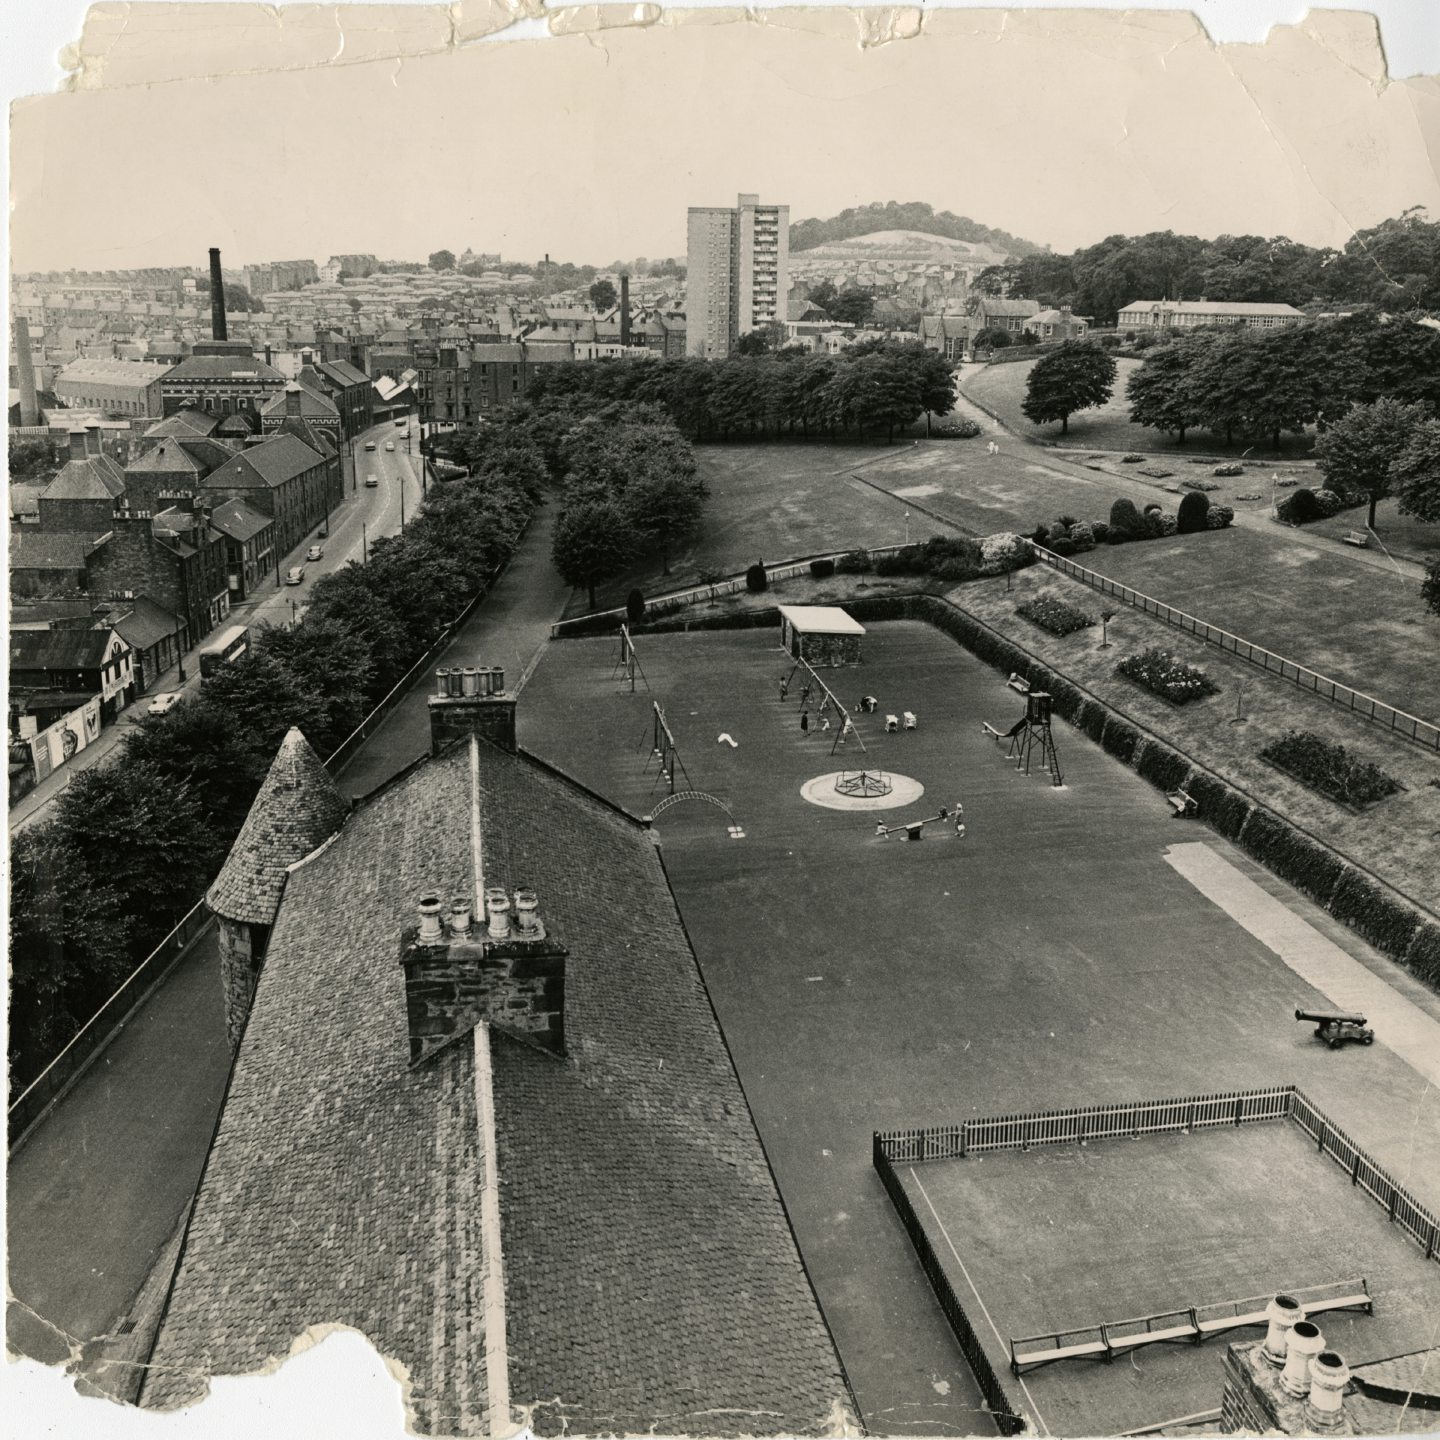 A view of Dundee's Dudhope Park 